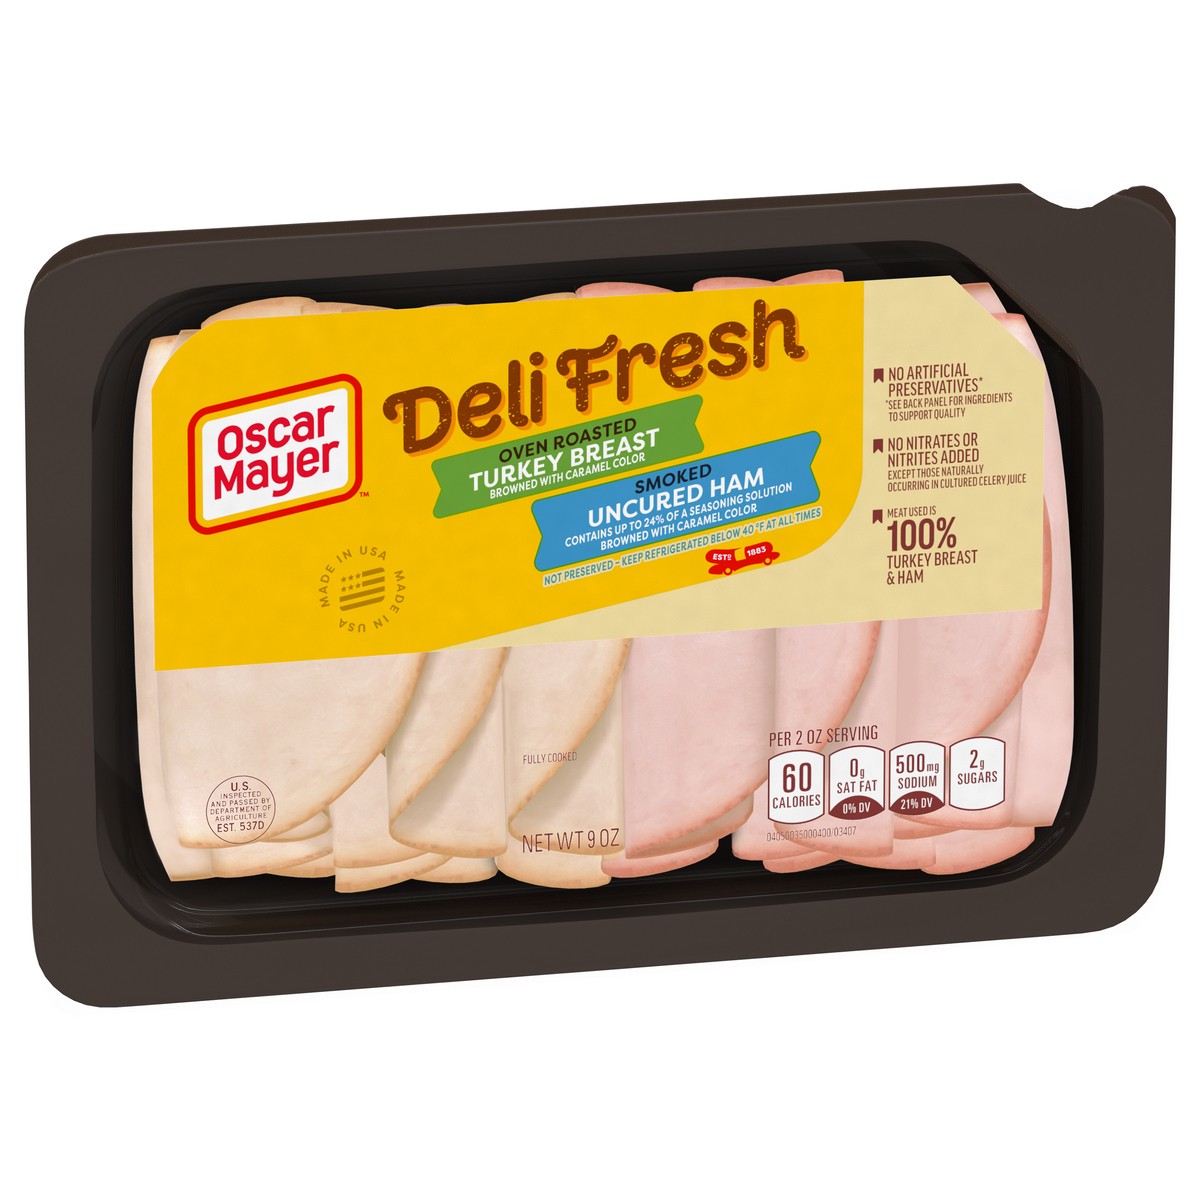 slide 4 of 9, Oscar Mayer Deli Fresh Oven Roasted Turkey Breast & Smoked Uncured Ham Sliced Lunch Meat Variety Pack, 9 oz. Tray, 9 oz